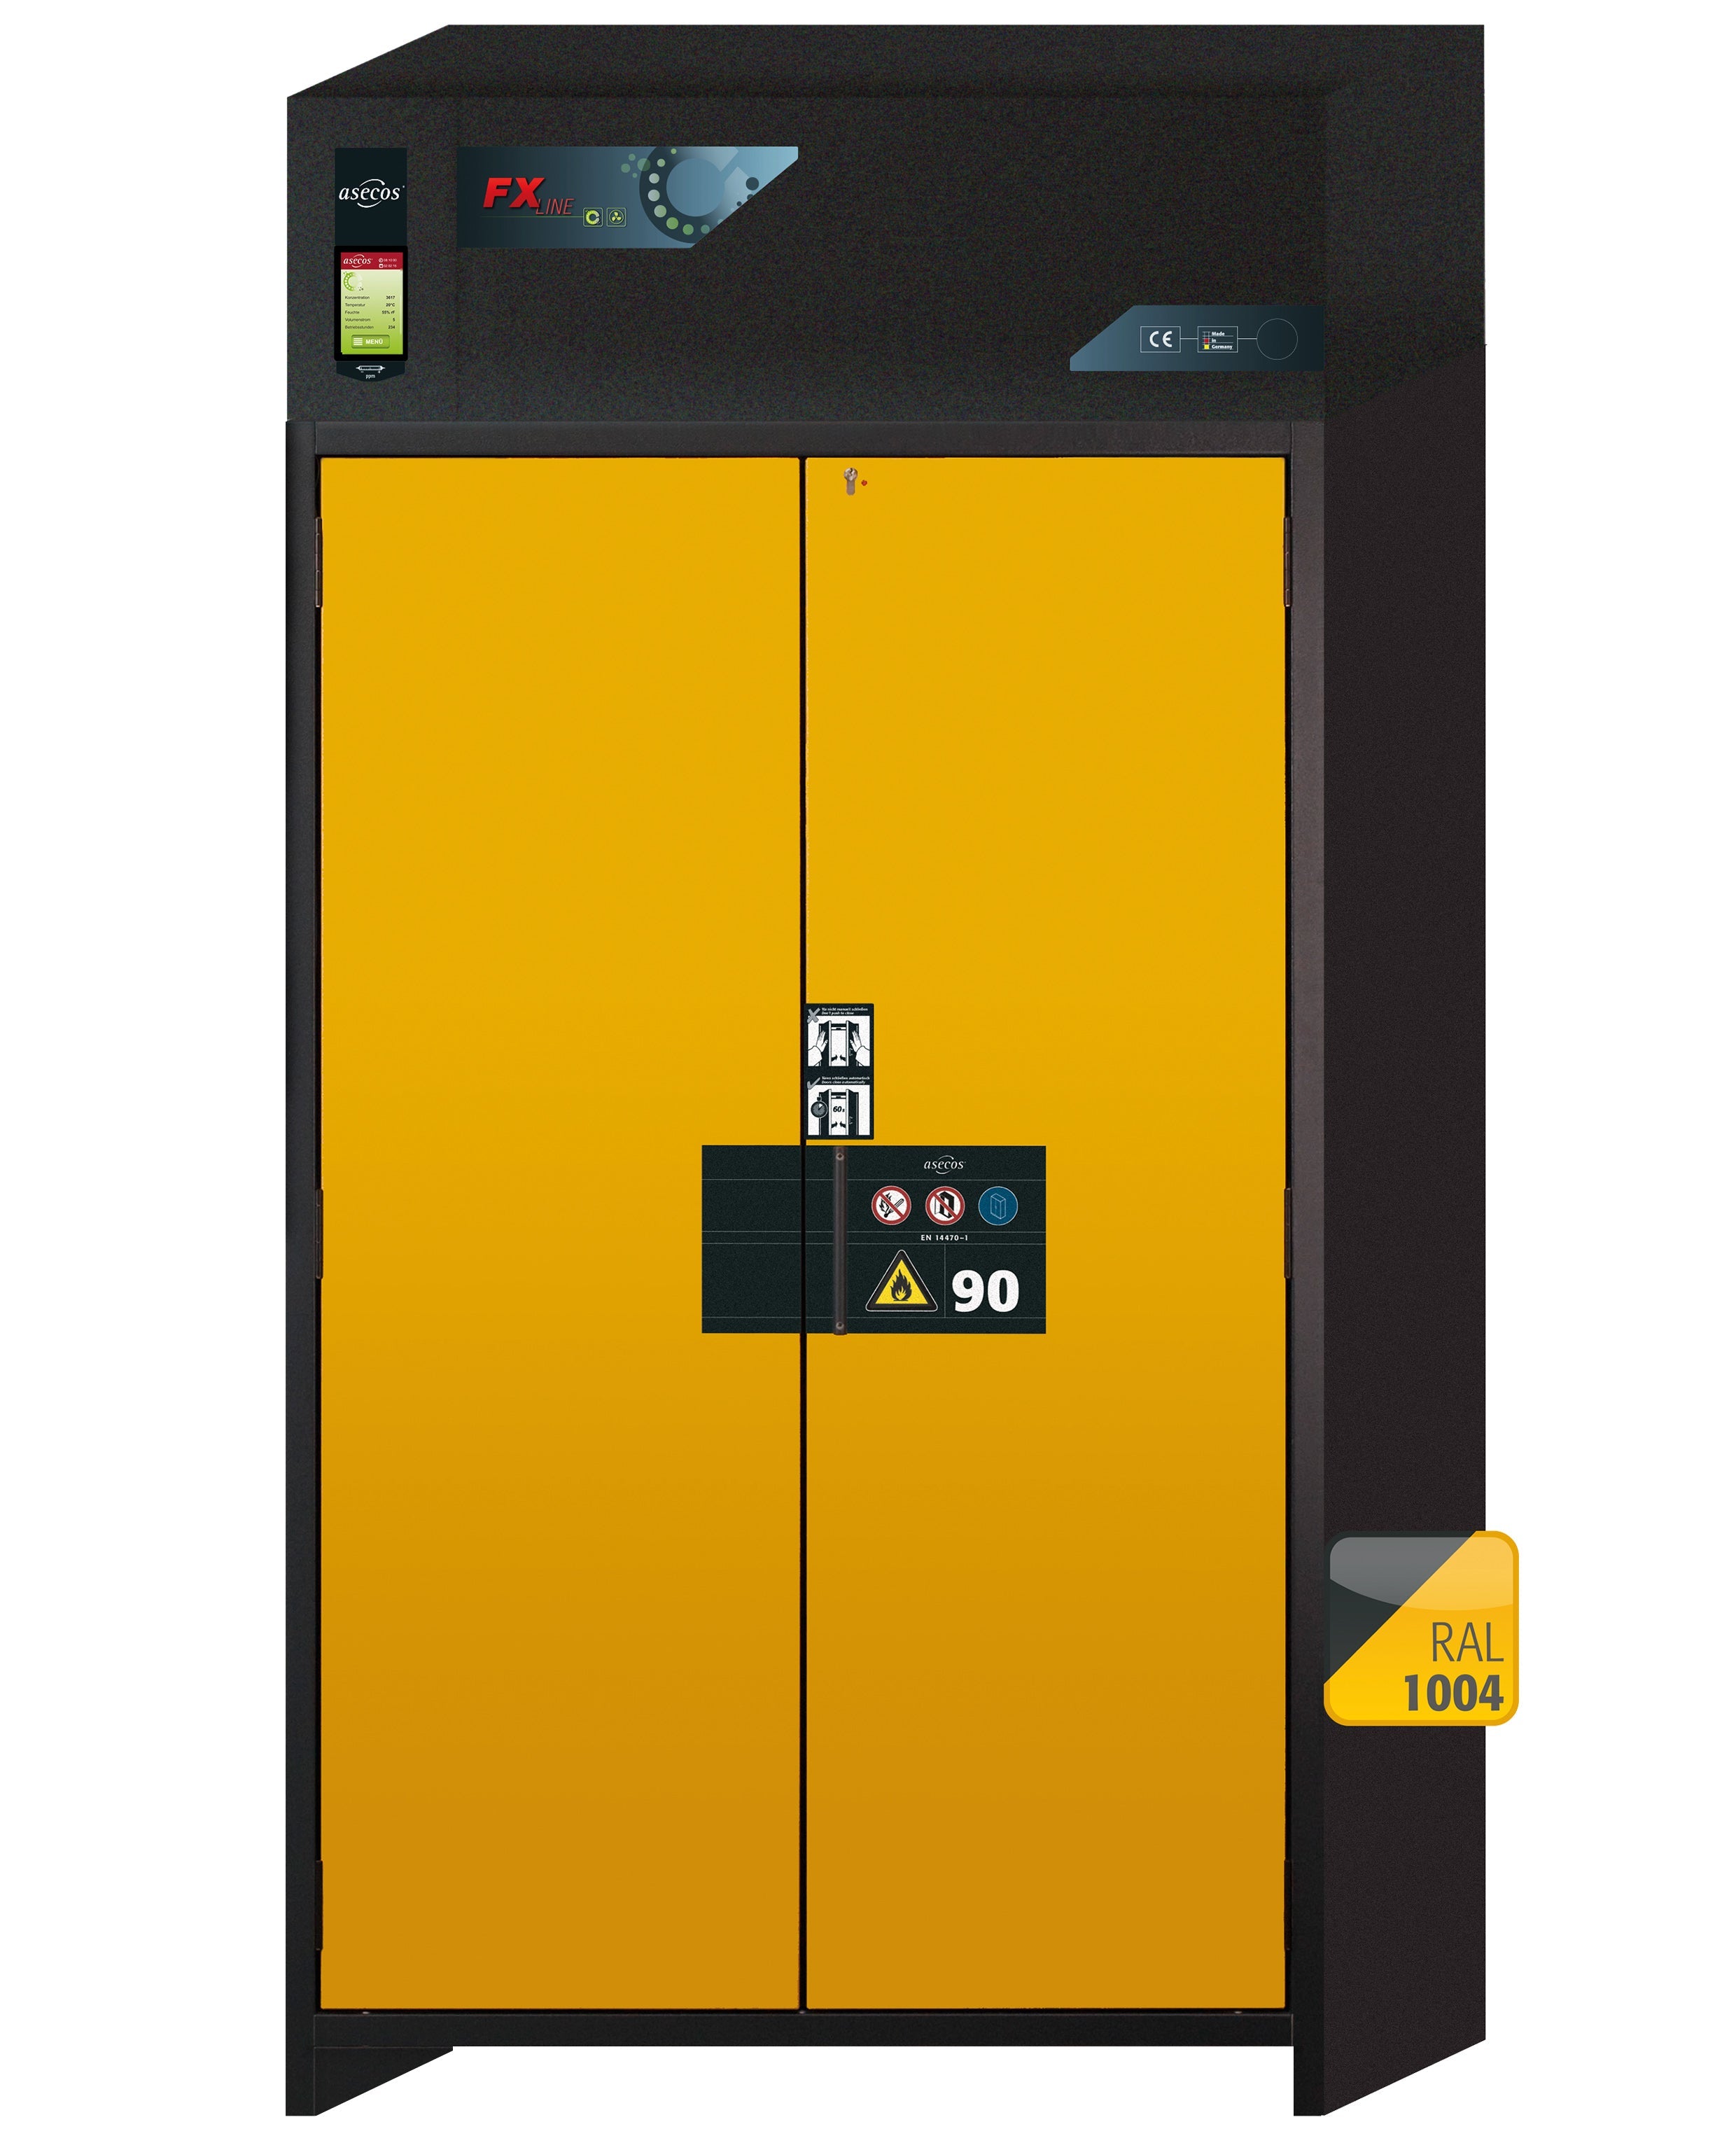 Type 90 recirculating air filter cabinet FX-PEGASUS-90 model FX90.229.120.WDAC in safety yellow RAL 1004 with 2x standard pull-out tray (sheet steel)